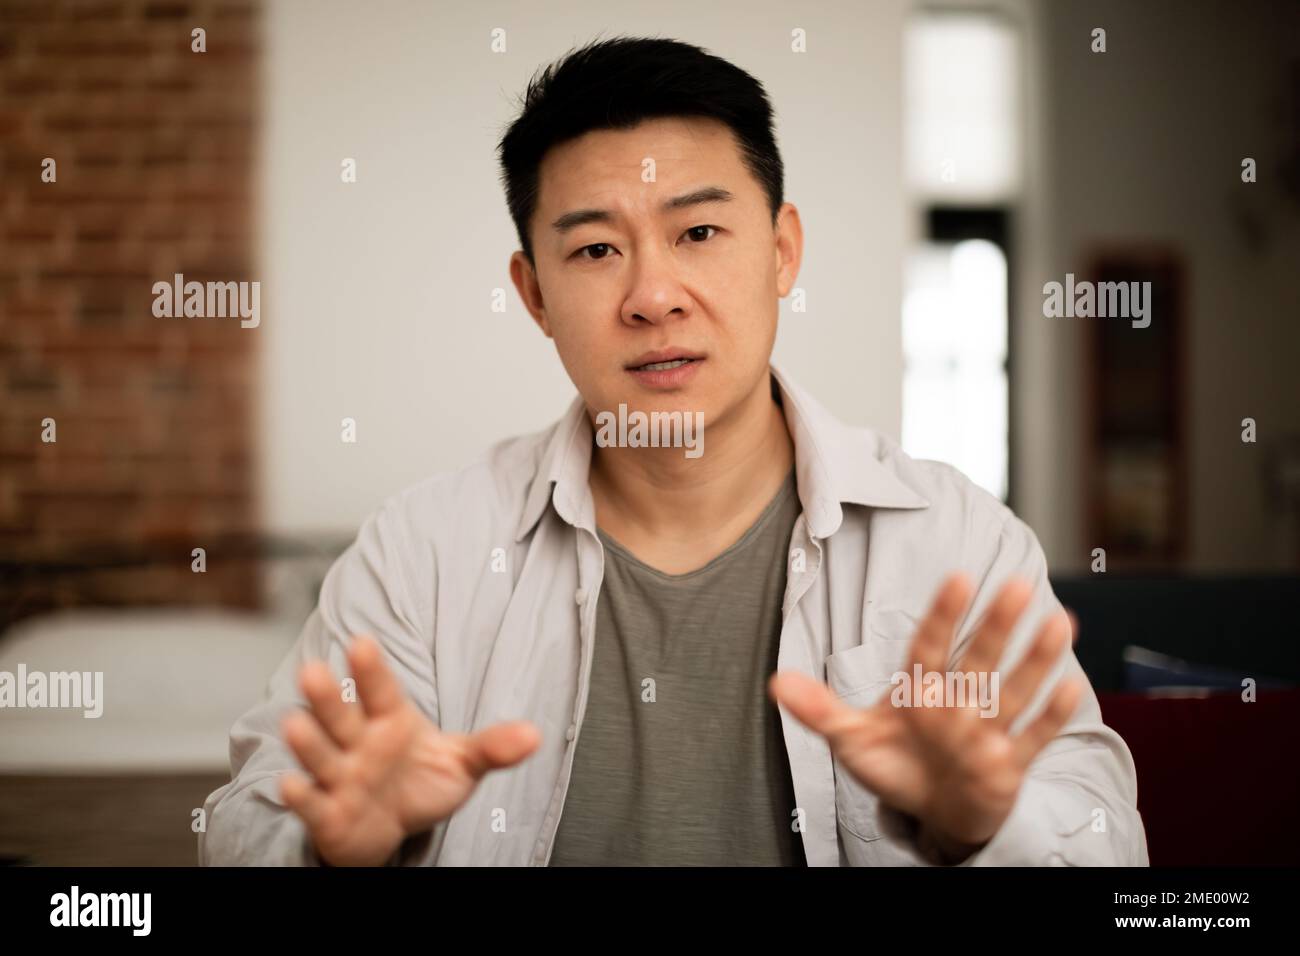 Portrait of asian middle aged man looking at camera and gesturing, communicating via video call, webcam view Stock Photo